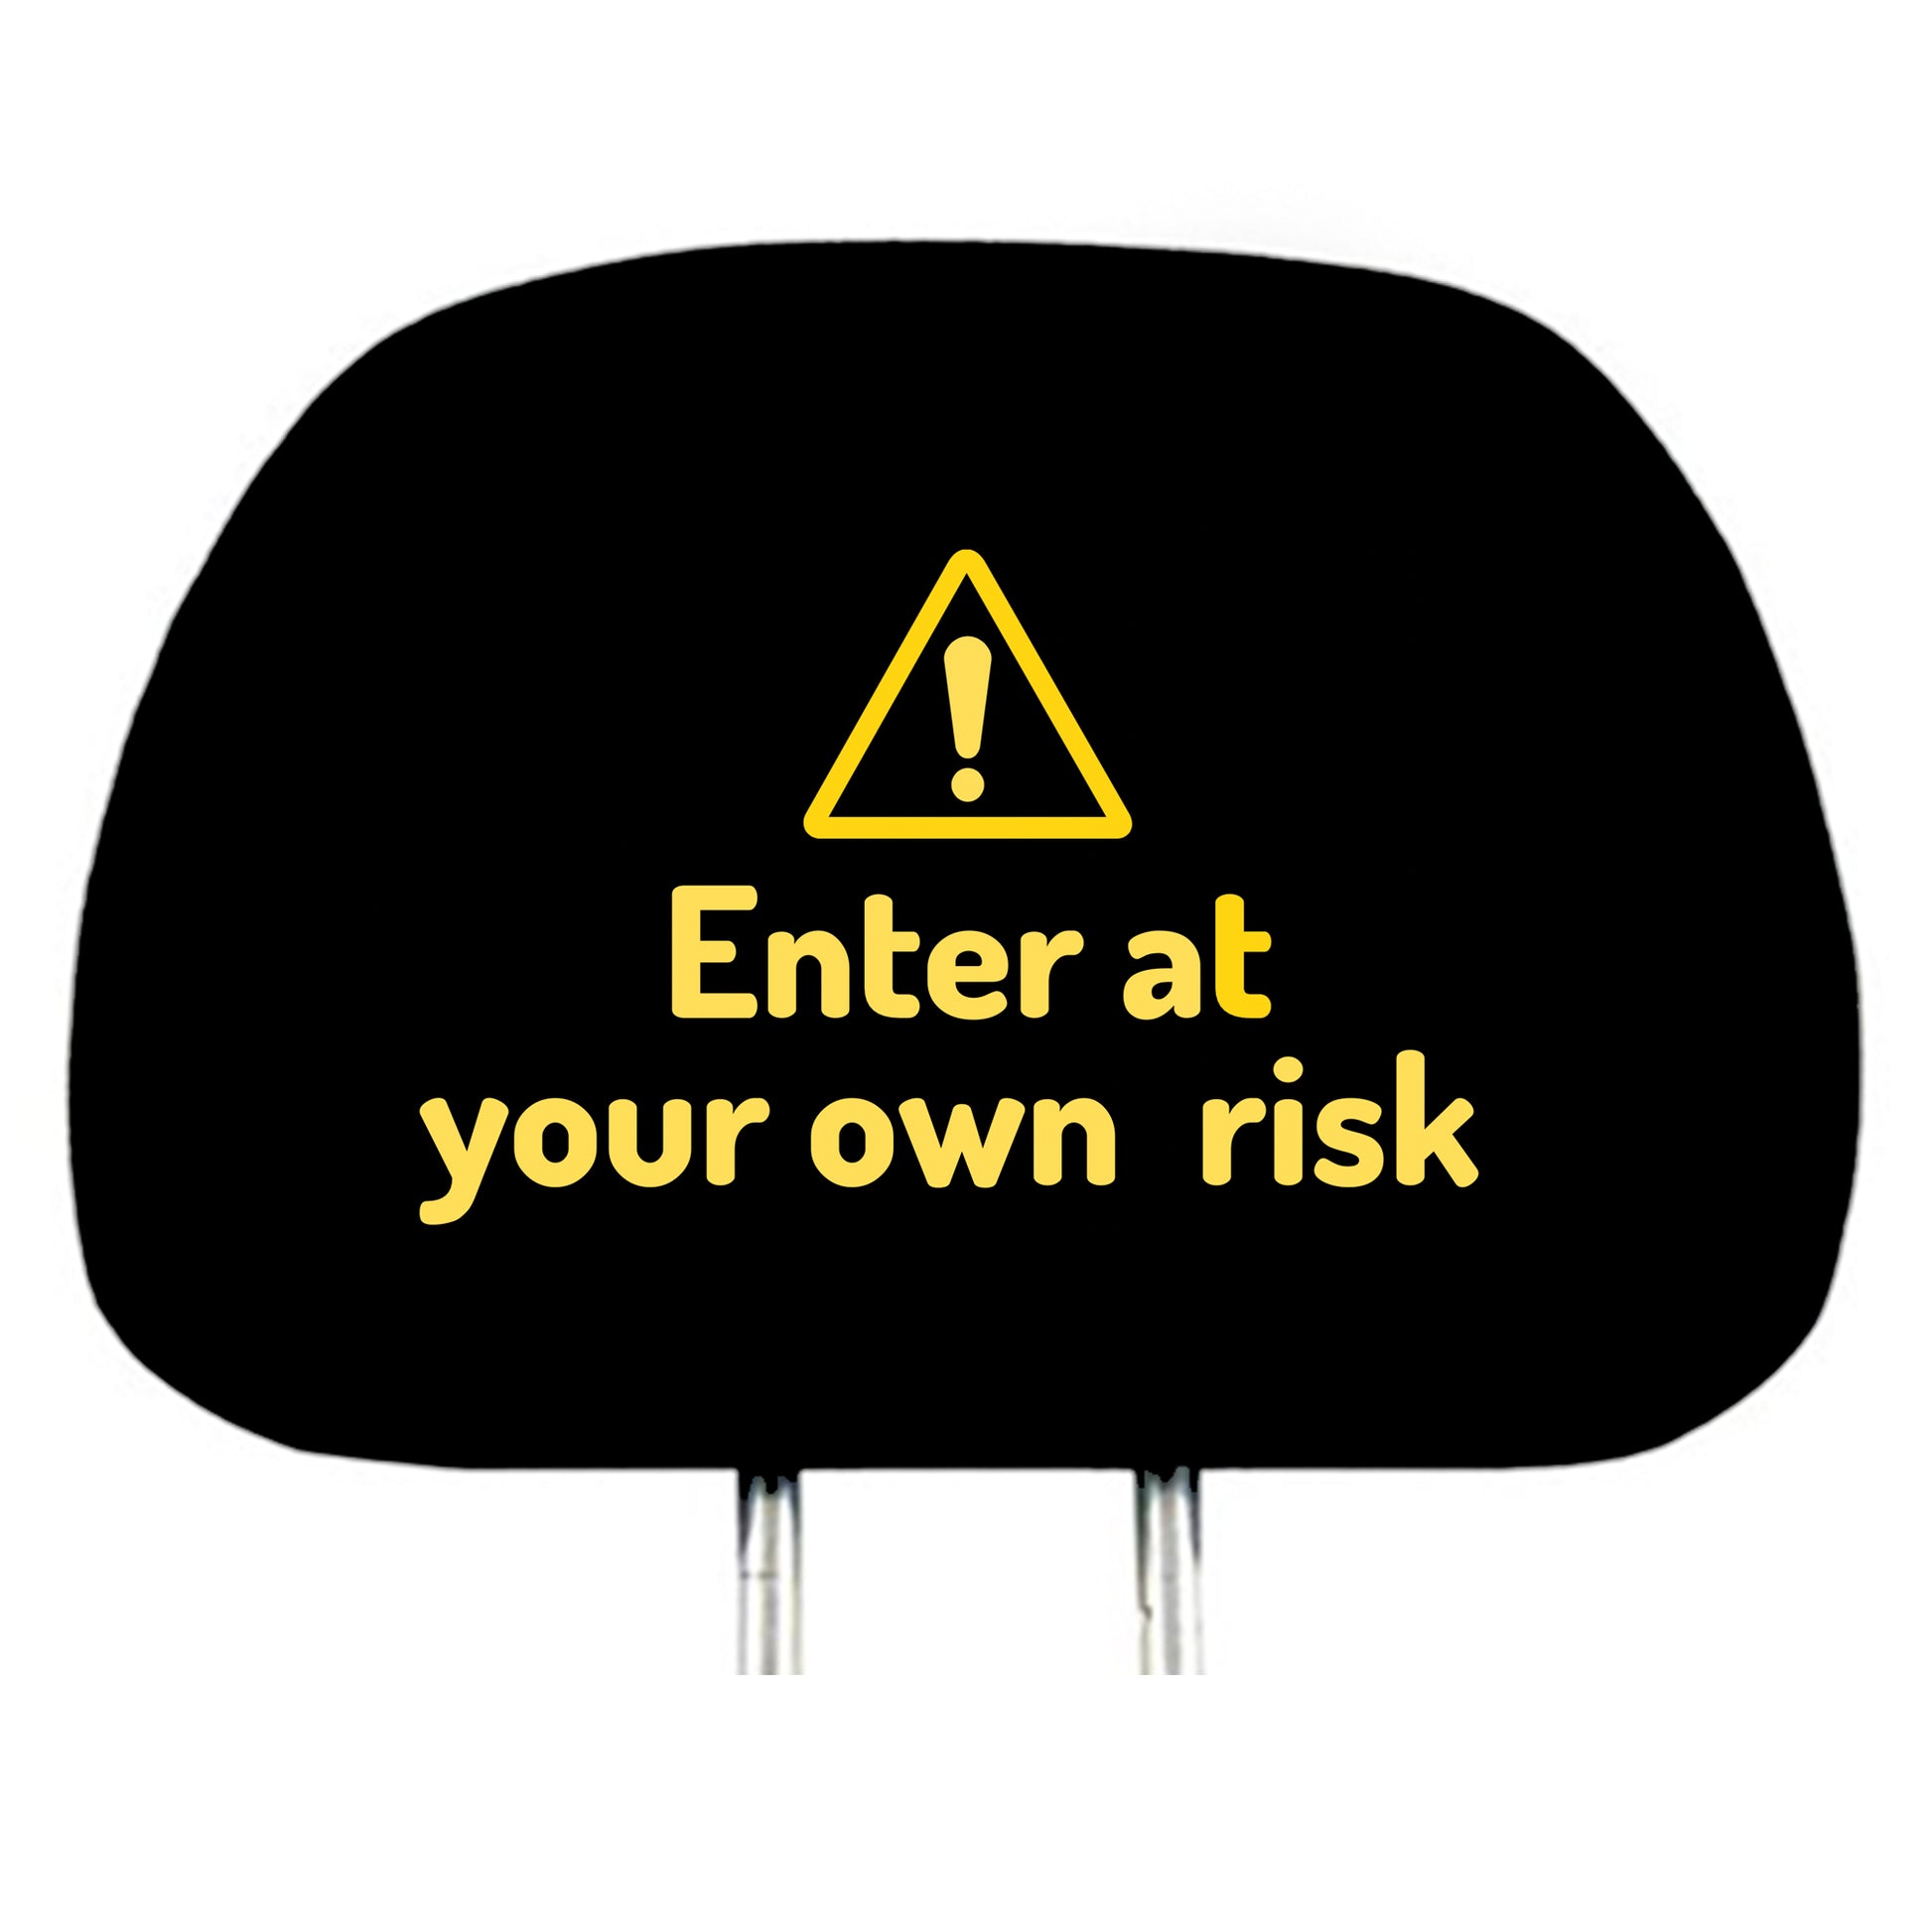 Enter at your own risk design headrest covers single piece image